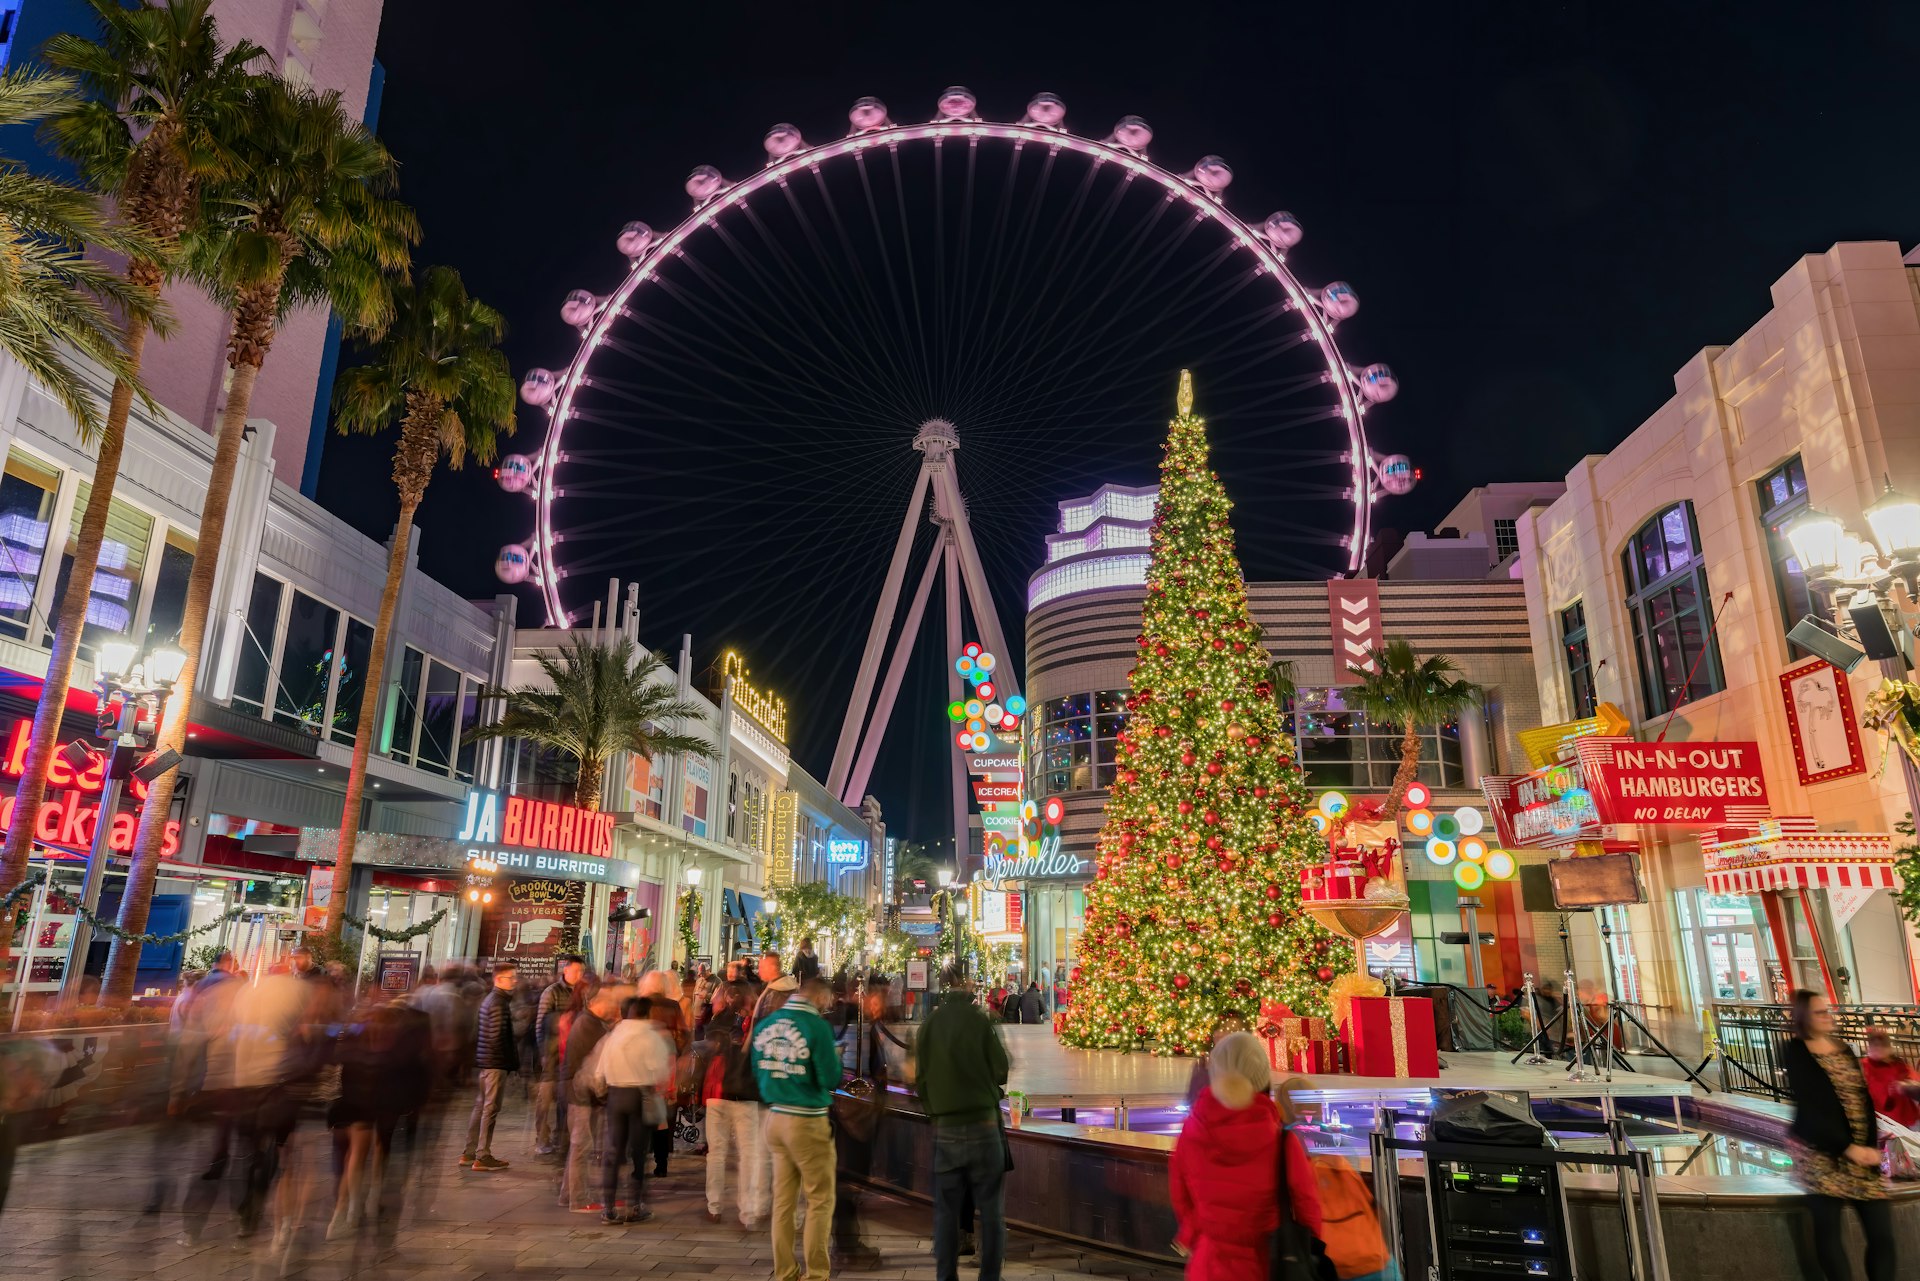 Night view of the Linq Ferris Wheel and a Christmas tree in Las Vegas